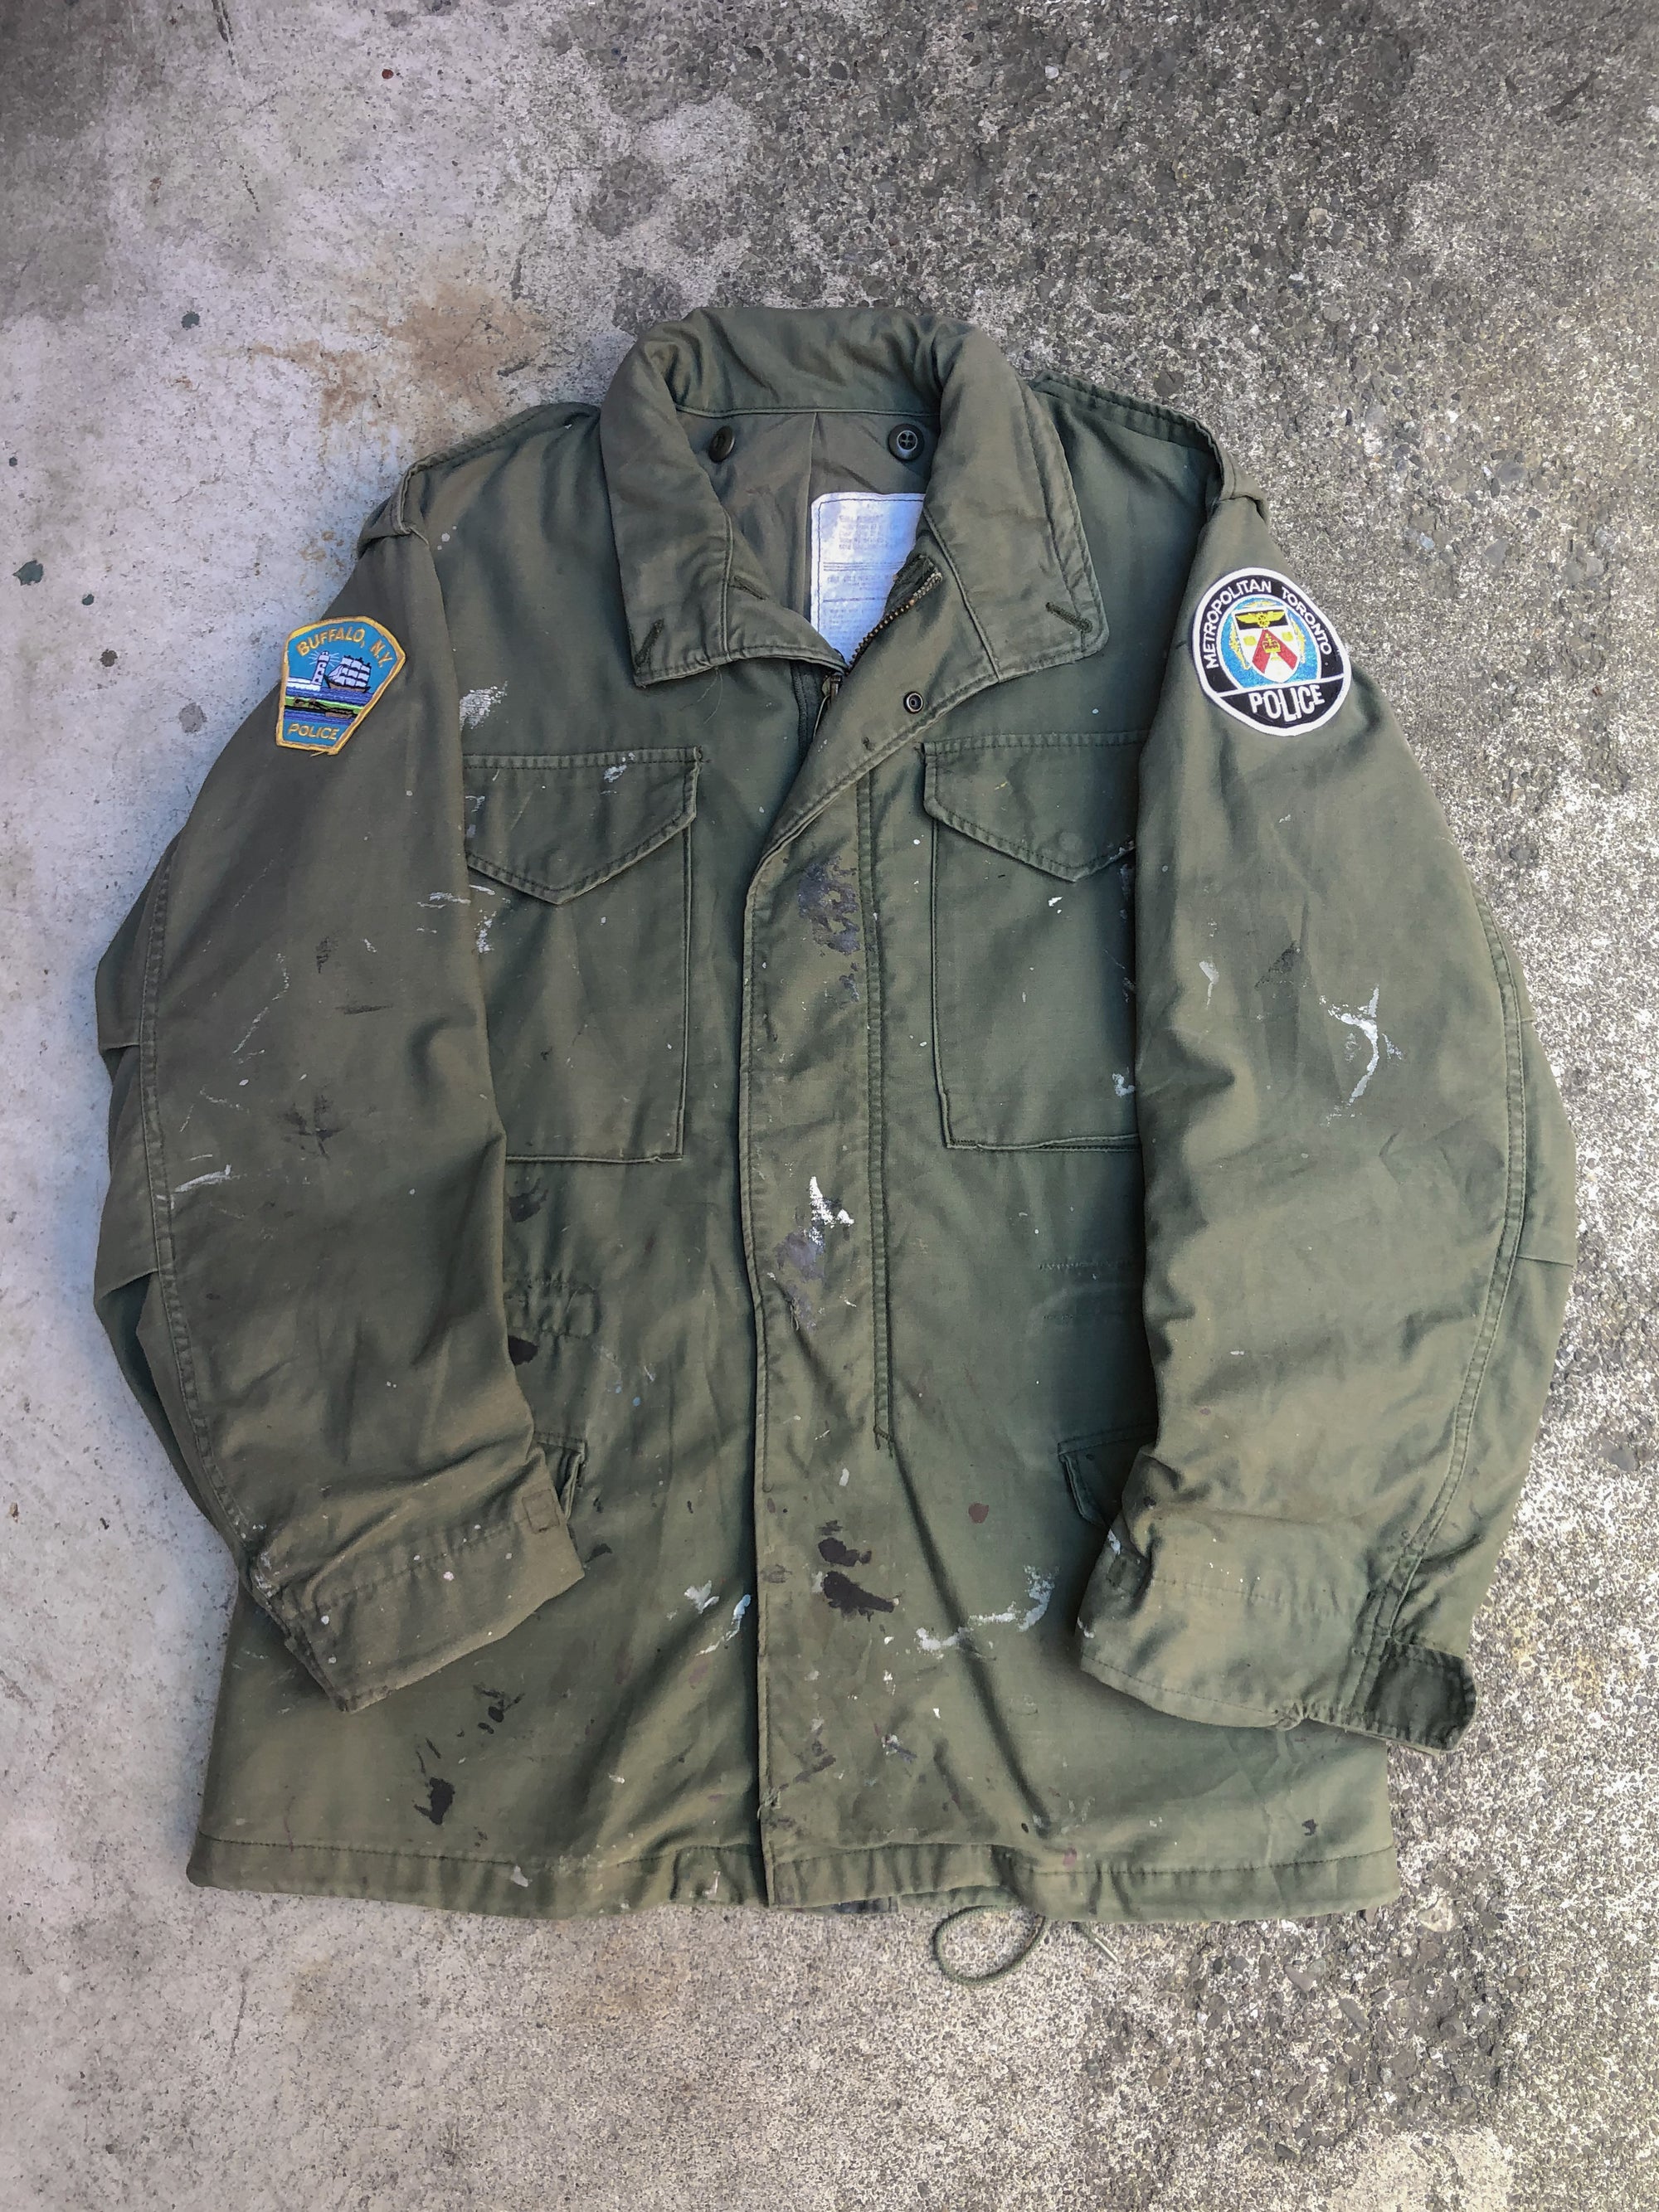 1970s Painted Faded “Buffalo Police” M51 Field Jacket (S/M)